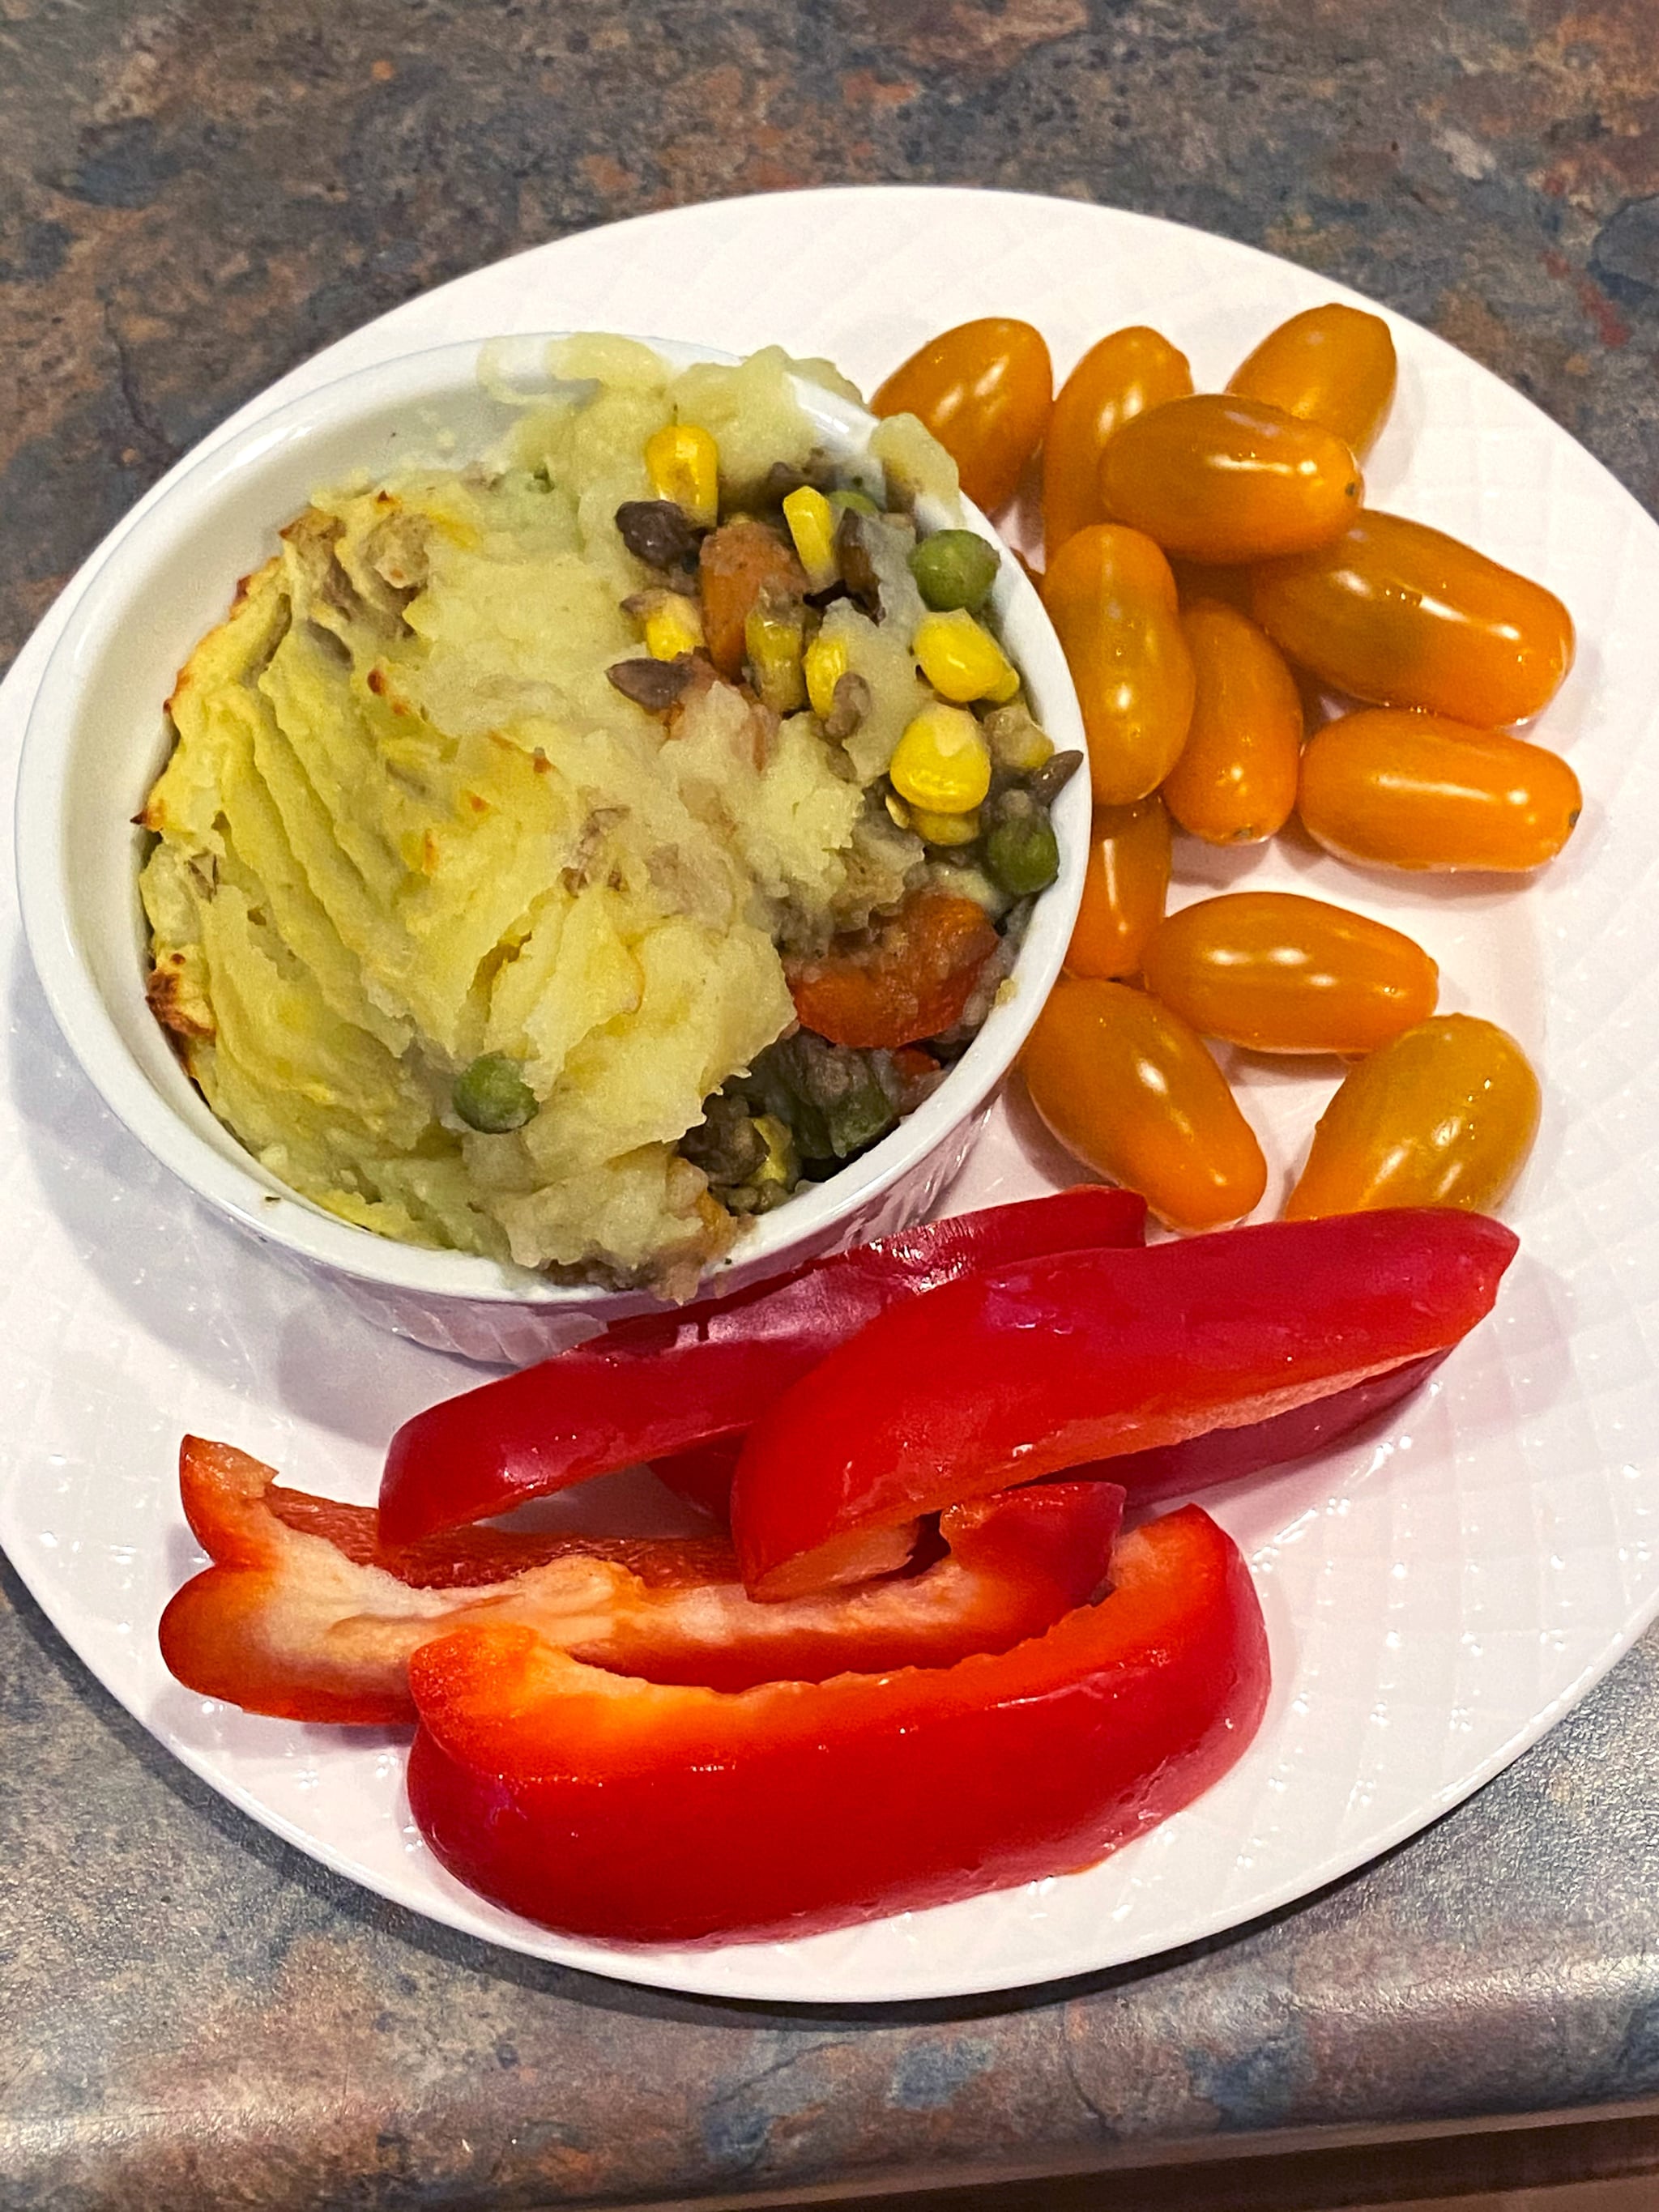 Dinner: Shepherd's Pie With Tomatoes and Red Pepper